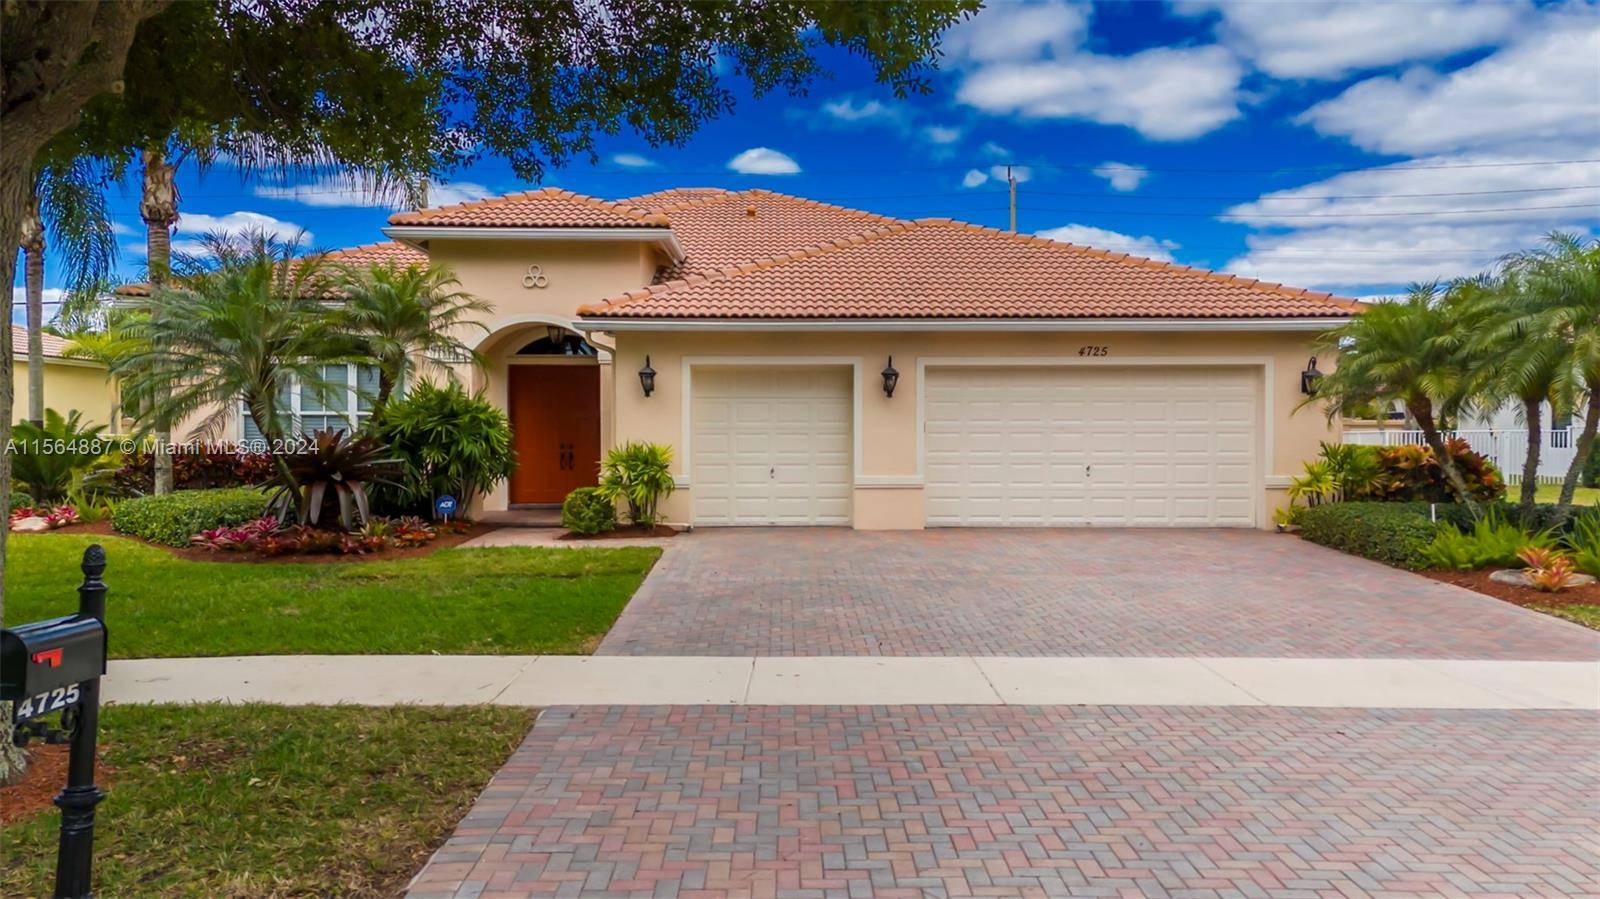 HIGHLY SOUGHT AFTER GATED COMMUNITY IN HIBBS GROVE, COOPER CITY !